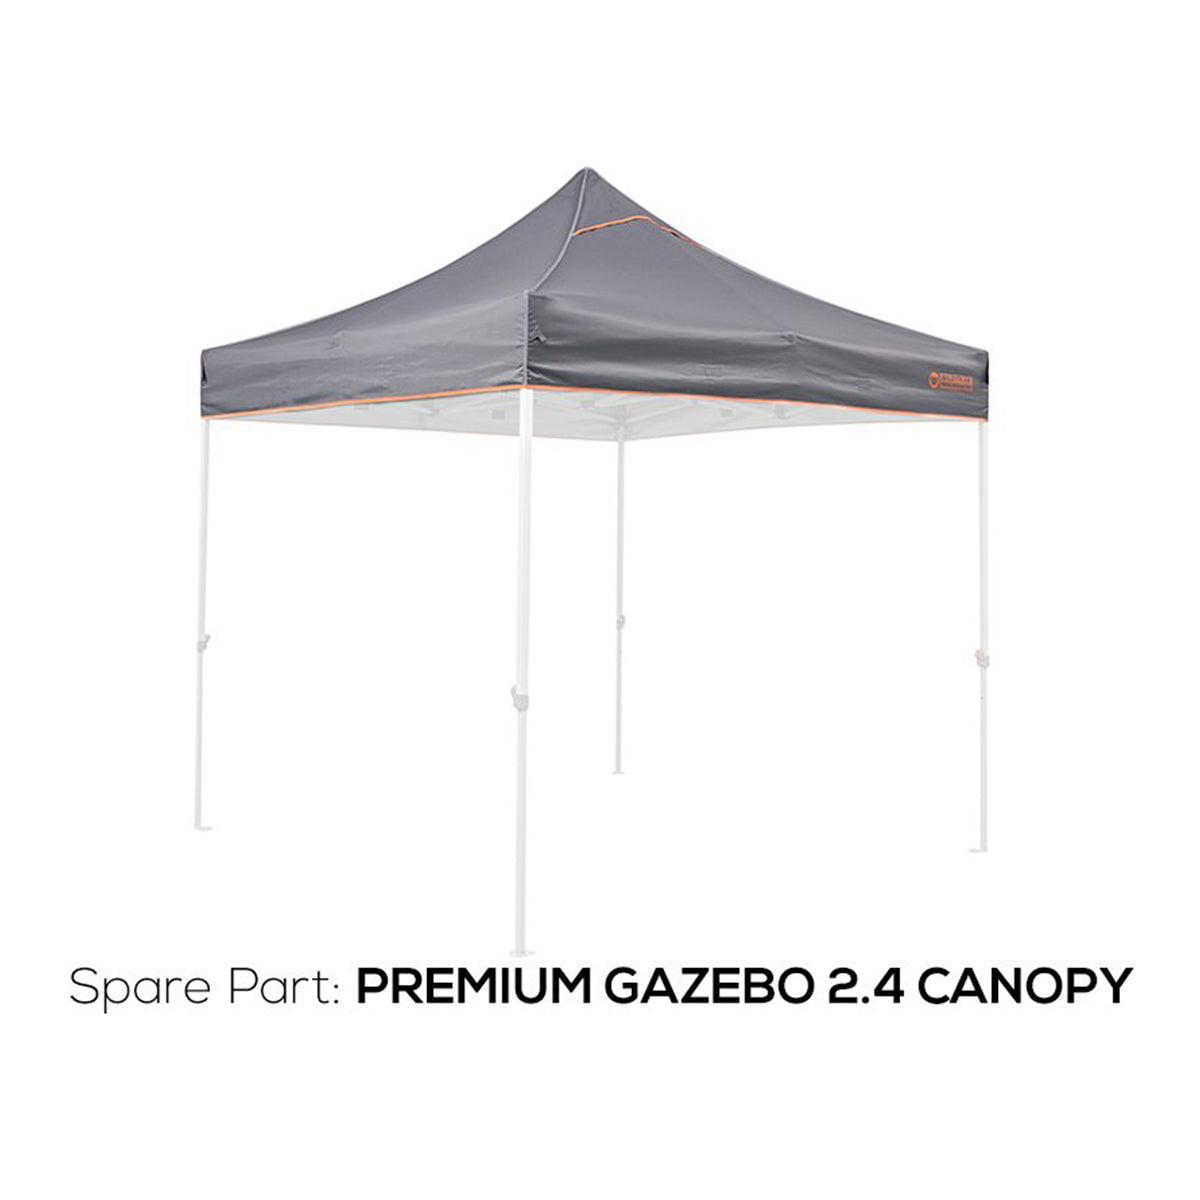 DELUXE GAZEBO 2.4 CANOPY REPLACEMENT